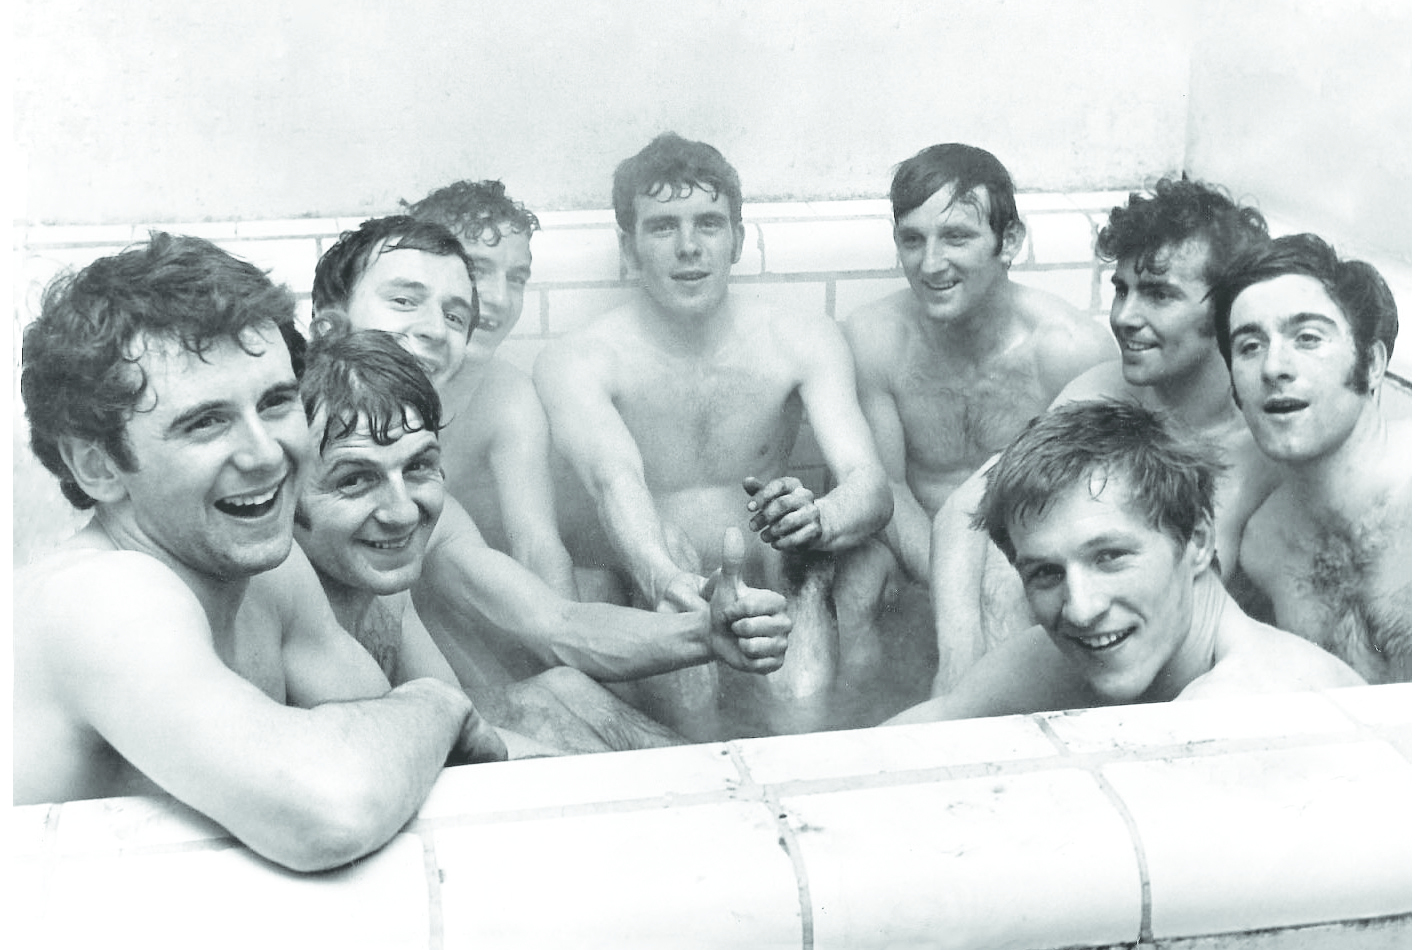 More memories from the 1960s as Watford FC win Division Three title